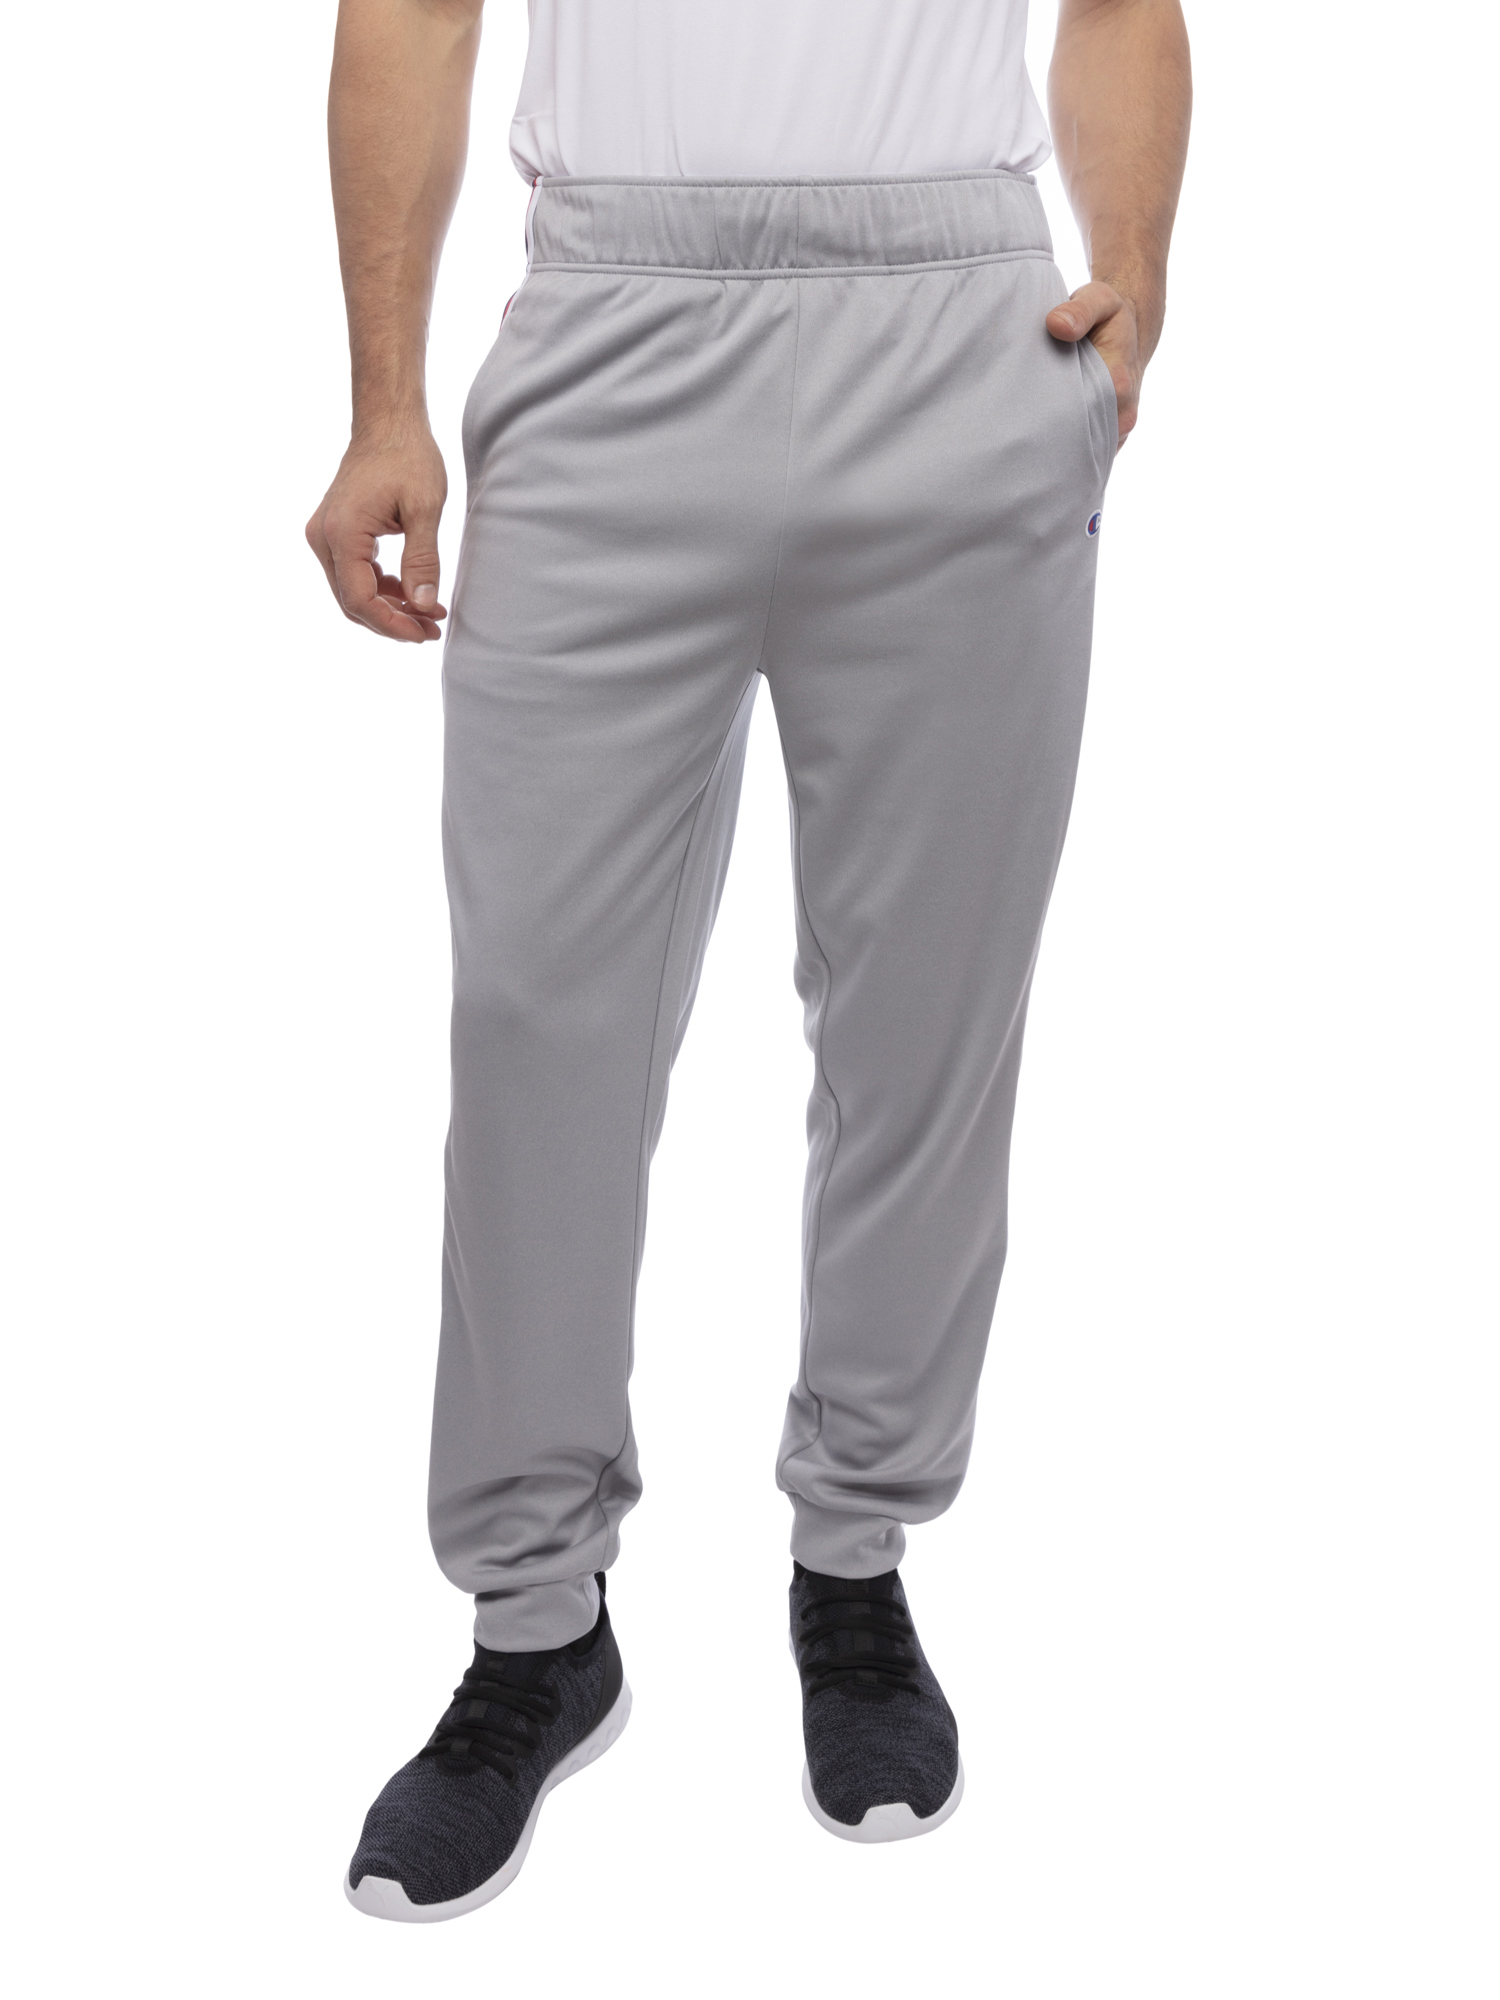 Champion Walmart Exclusive Men's Track Pant, up to Size 2XL - image 3 of 5